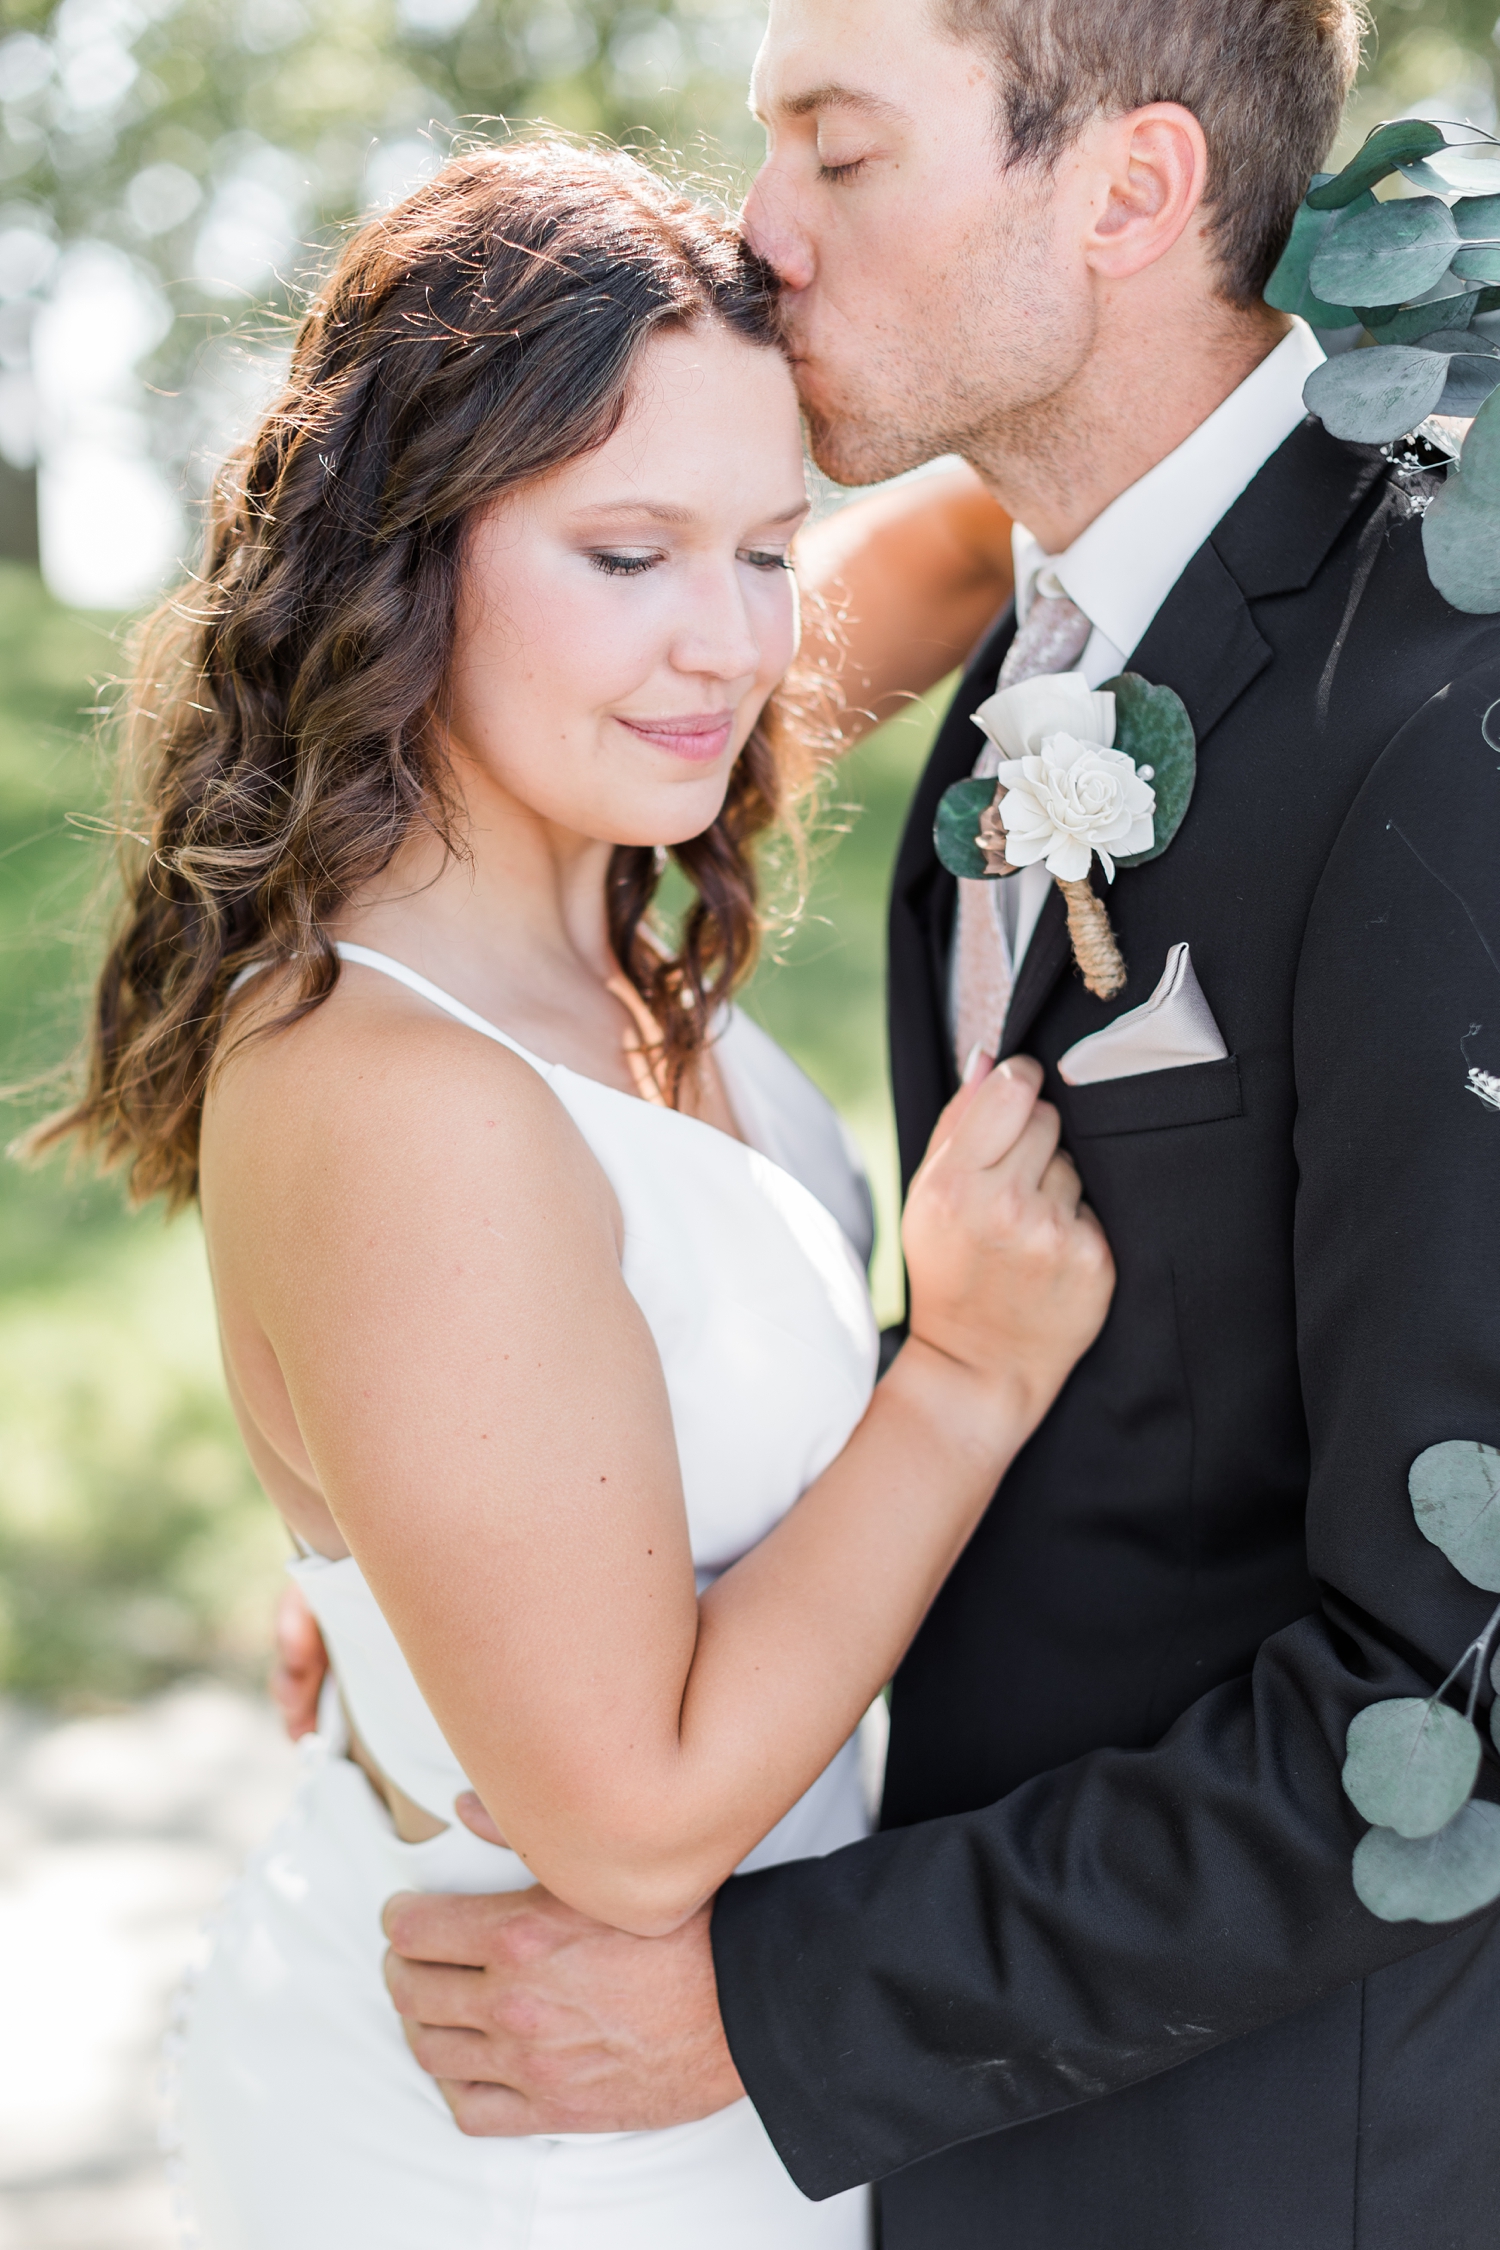 Grant kisses Alyssa on her forehead as she looks down at 5 Island Campground in Emmetsburg, IA | CB Studio